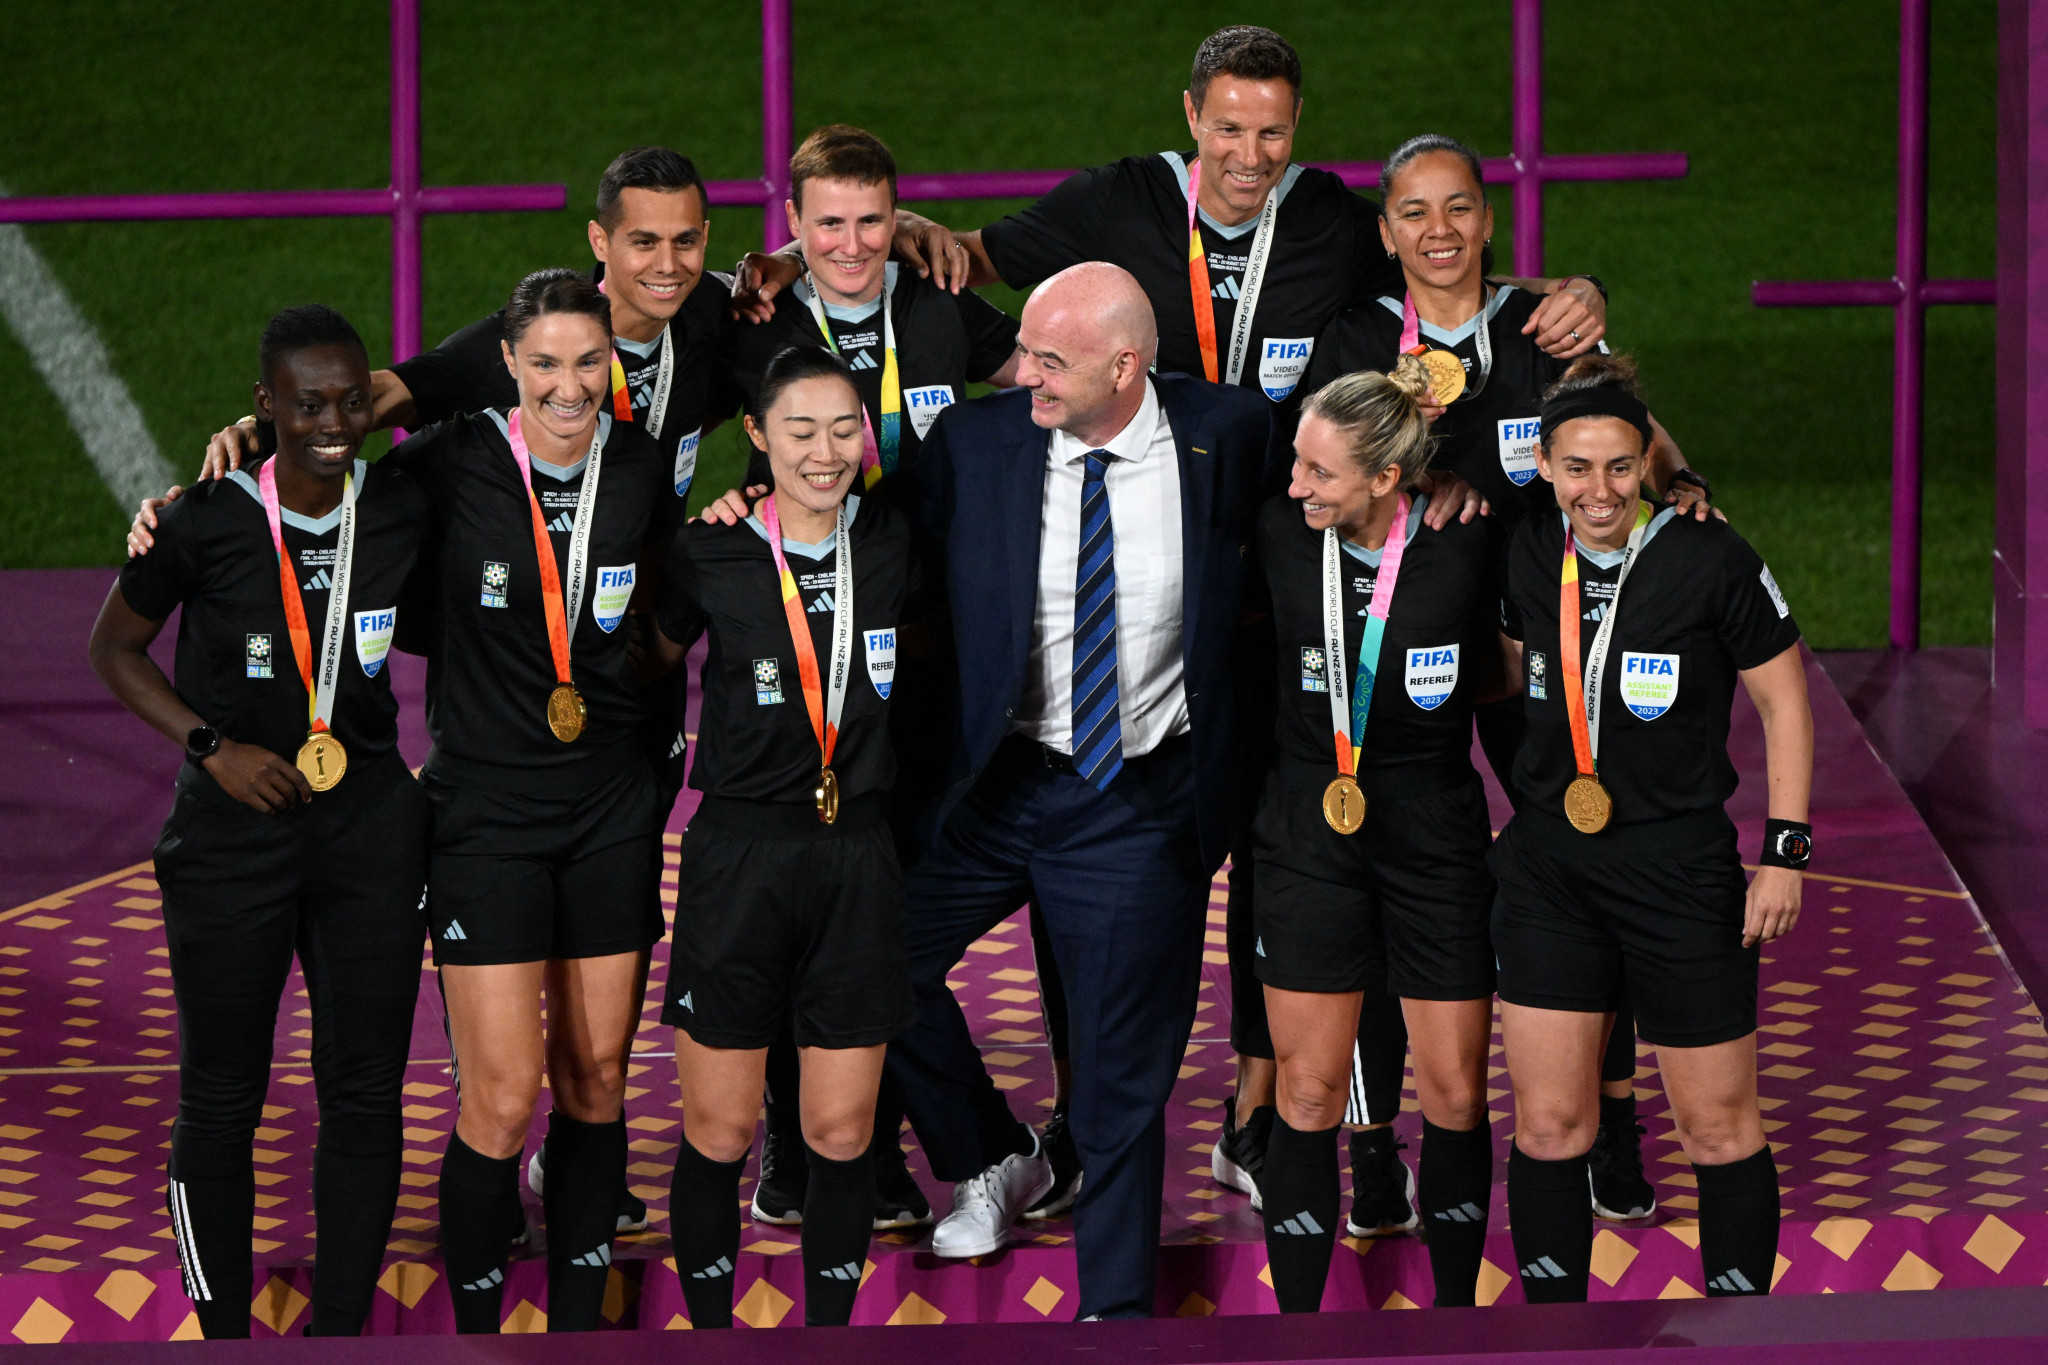 FIFA President Gianni Infantino poses with match officials ©Getty Images